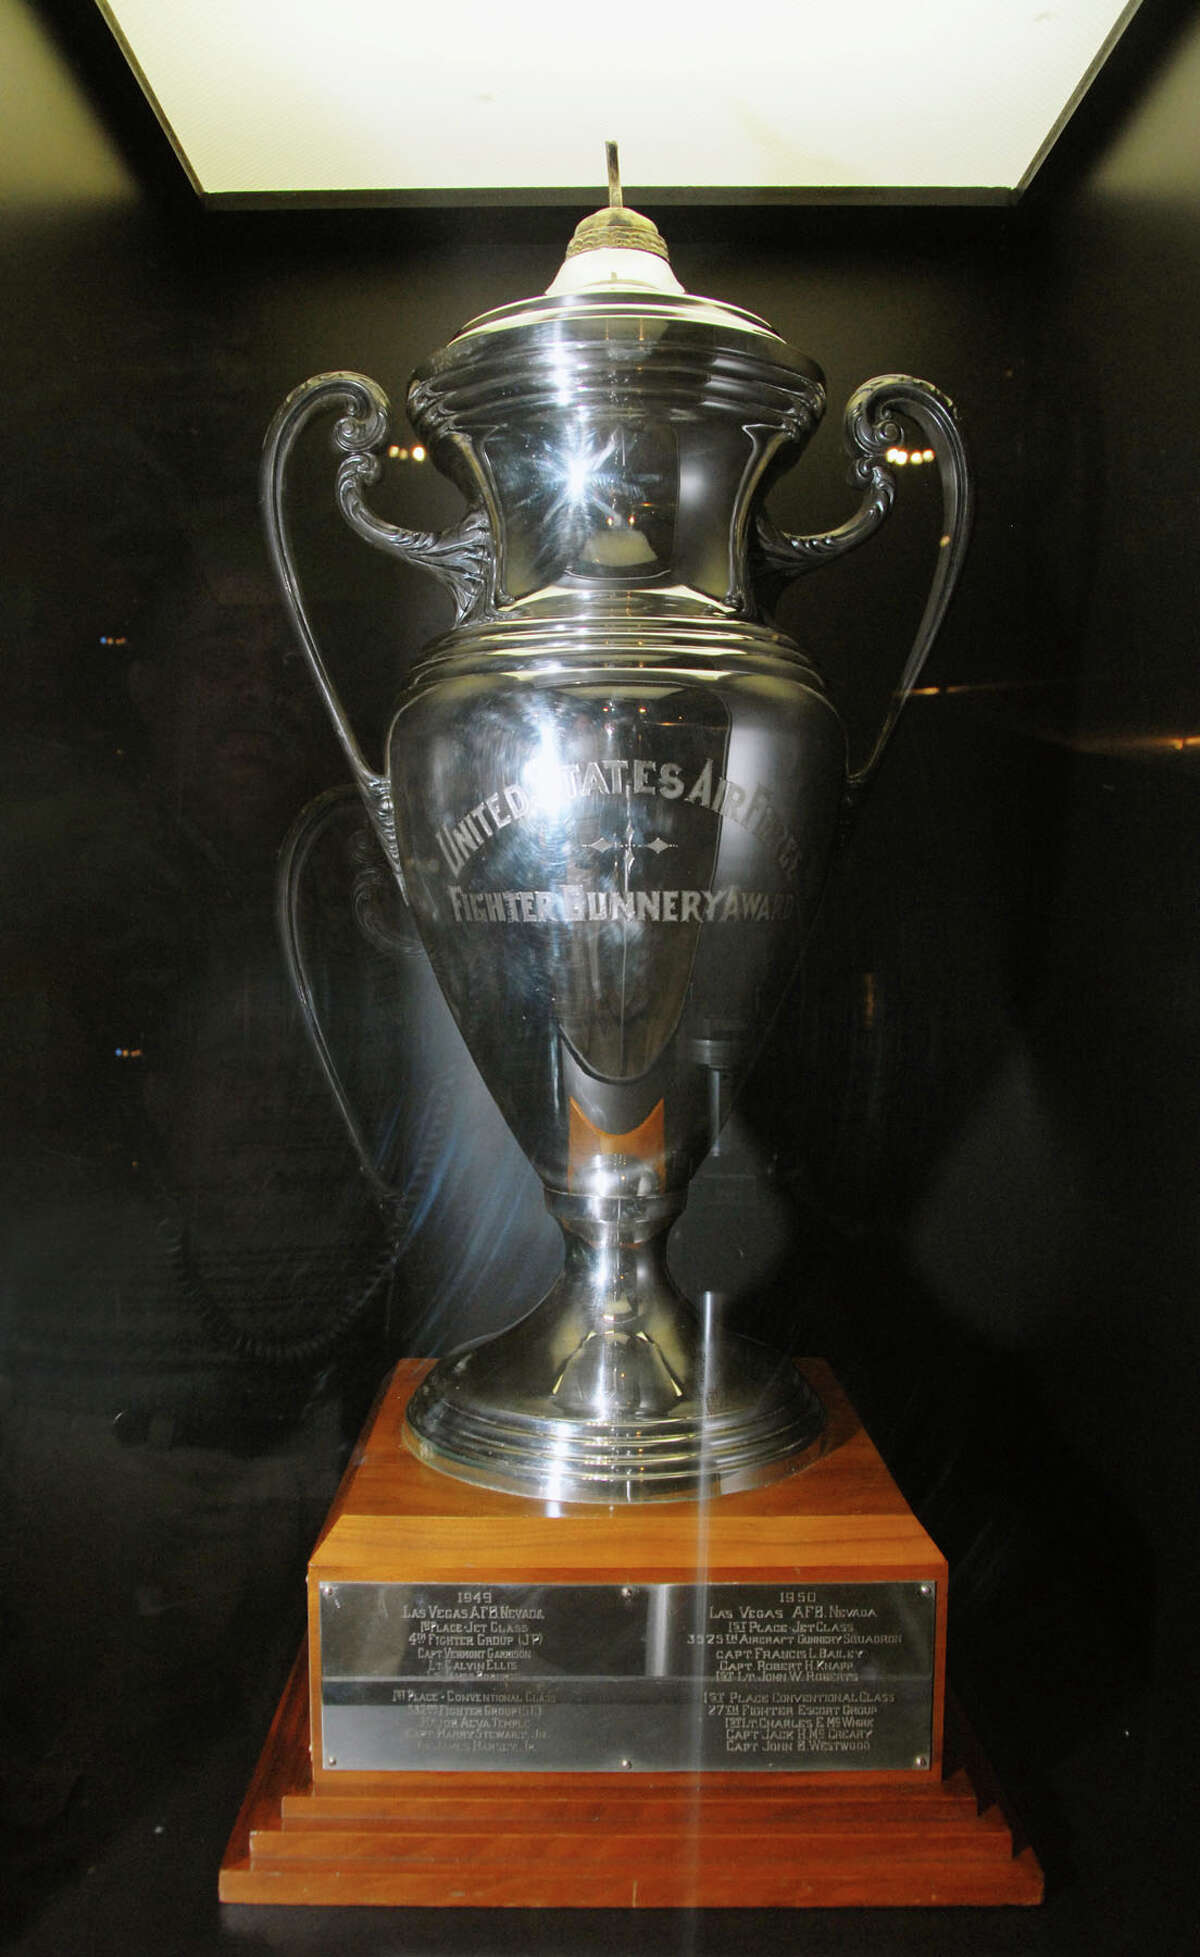 USAF Fighter Gunnery Competition trophy is displayed at the National Museum of the U.S. Air Force in Dayton, Ohio. CREDIT: U.S. Air Force